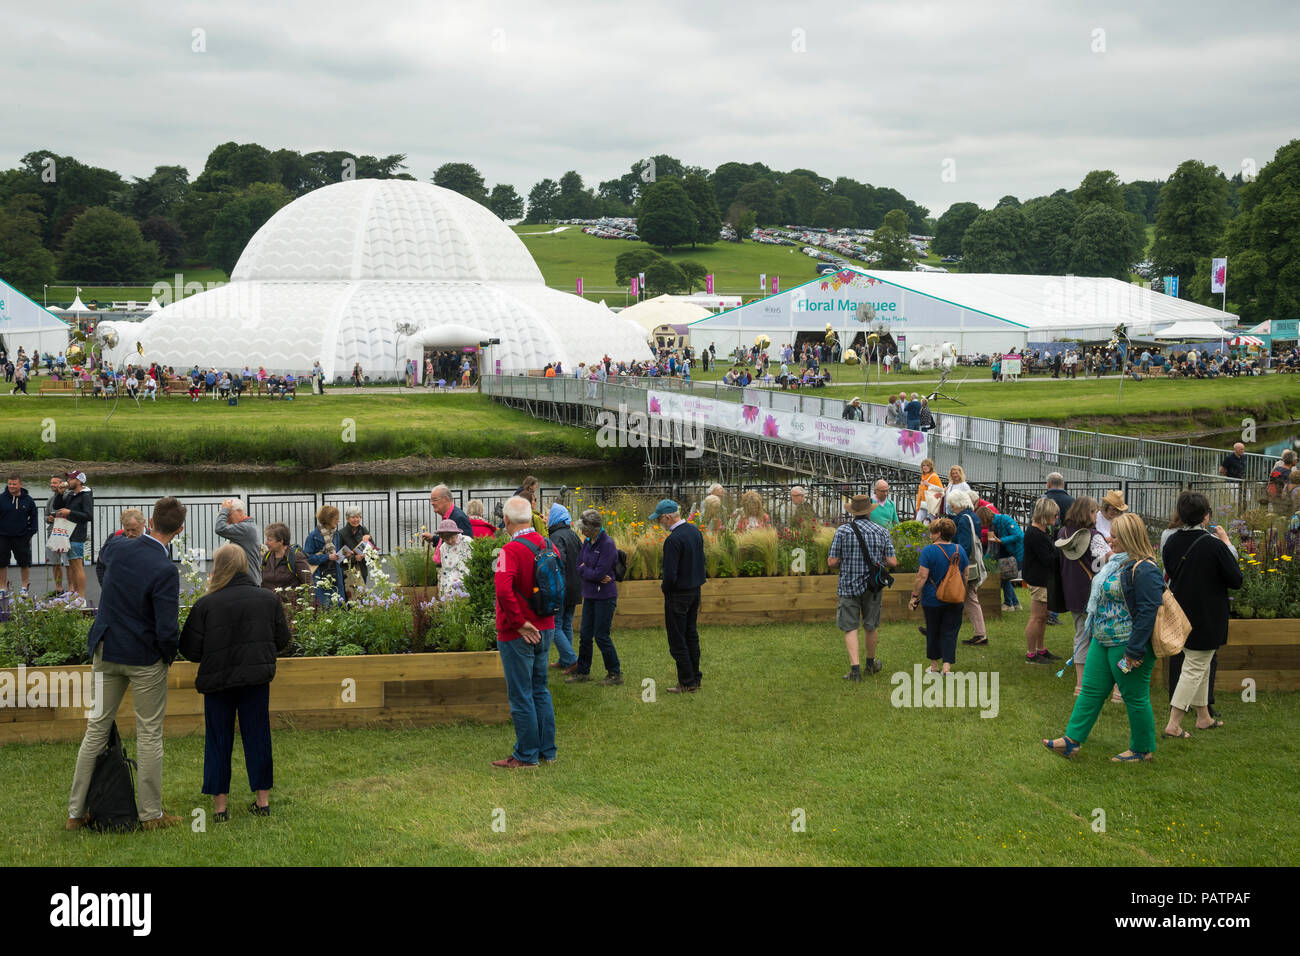 Showground at RHS Chatsworth Flower Show (visitors by exhibits, marquee, Great Conservatory dome, river & temporary bridge) Derbyshire, England, UK. Stock Photo